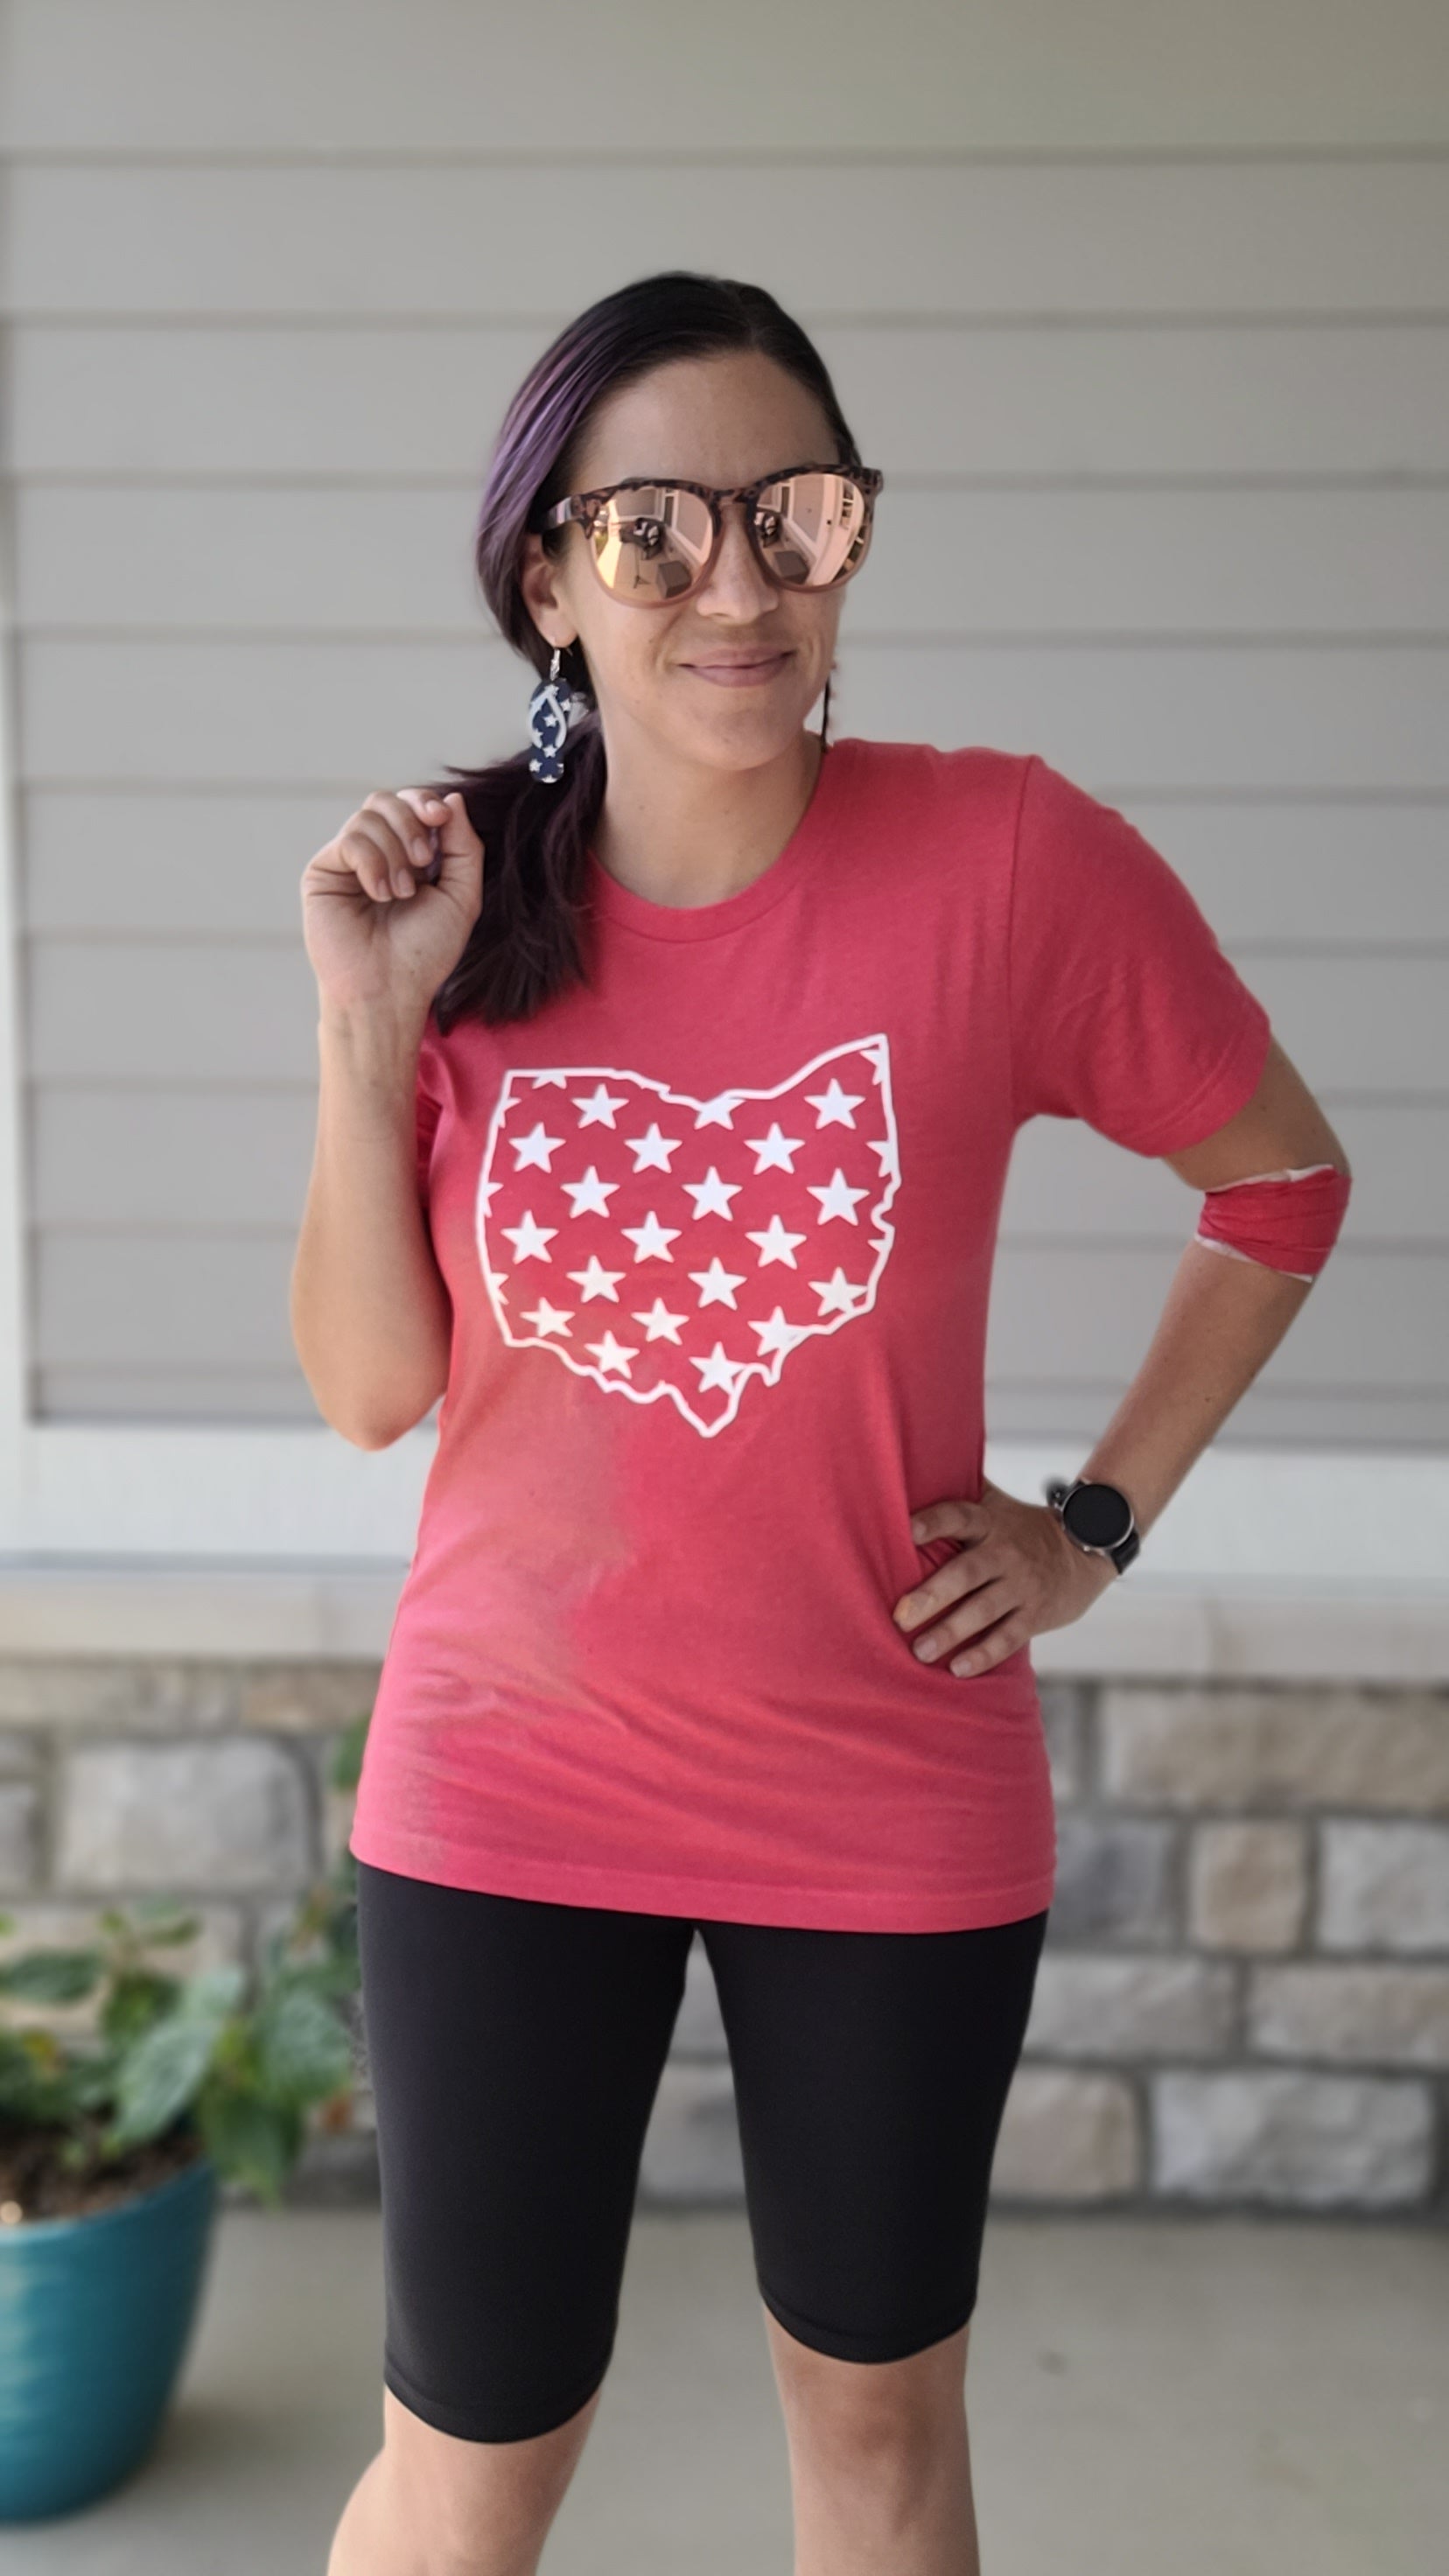 Shop Ohio Stars Tee - Vintage Red-Graphic Tee at Ruby Joy Boutique, a Women's Clothing Store in Pickerington, Ohio